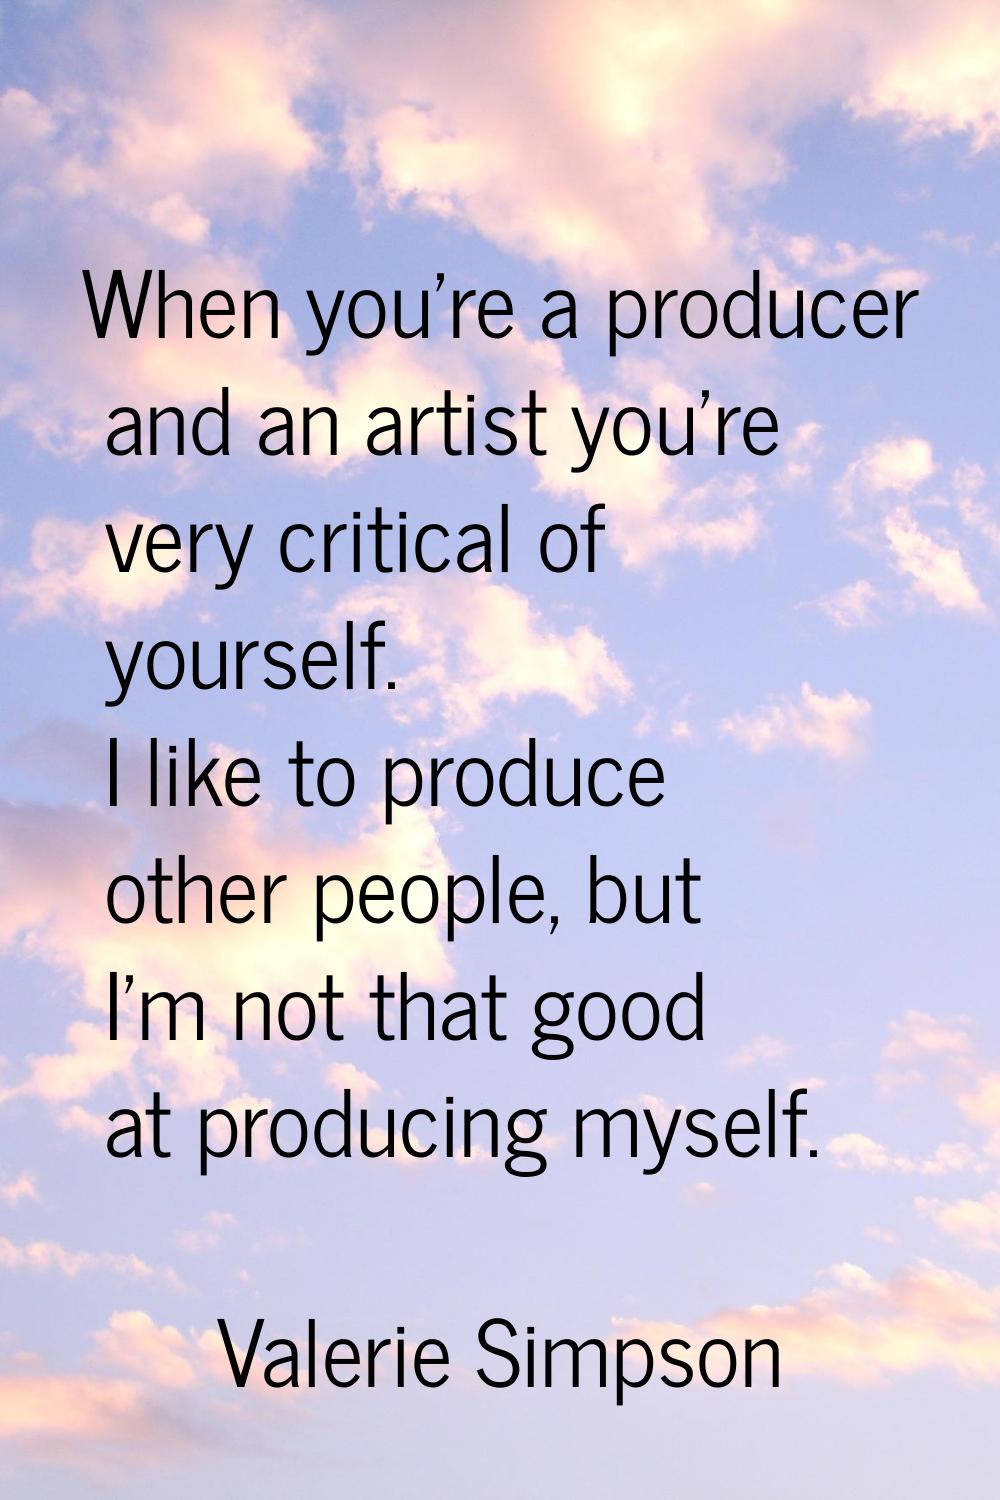 When you're a producer and an artist you're very critical of yourself. I like to produce other peop